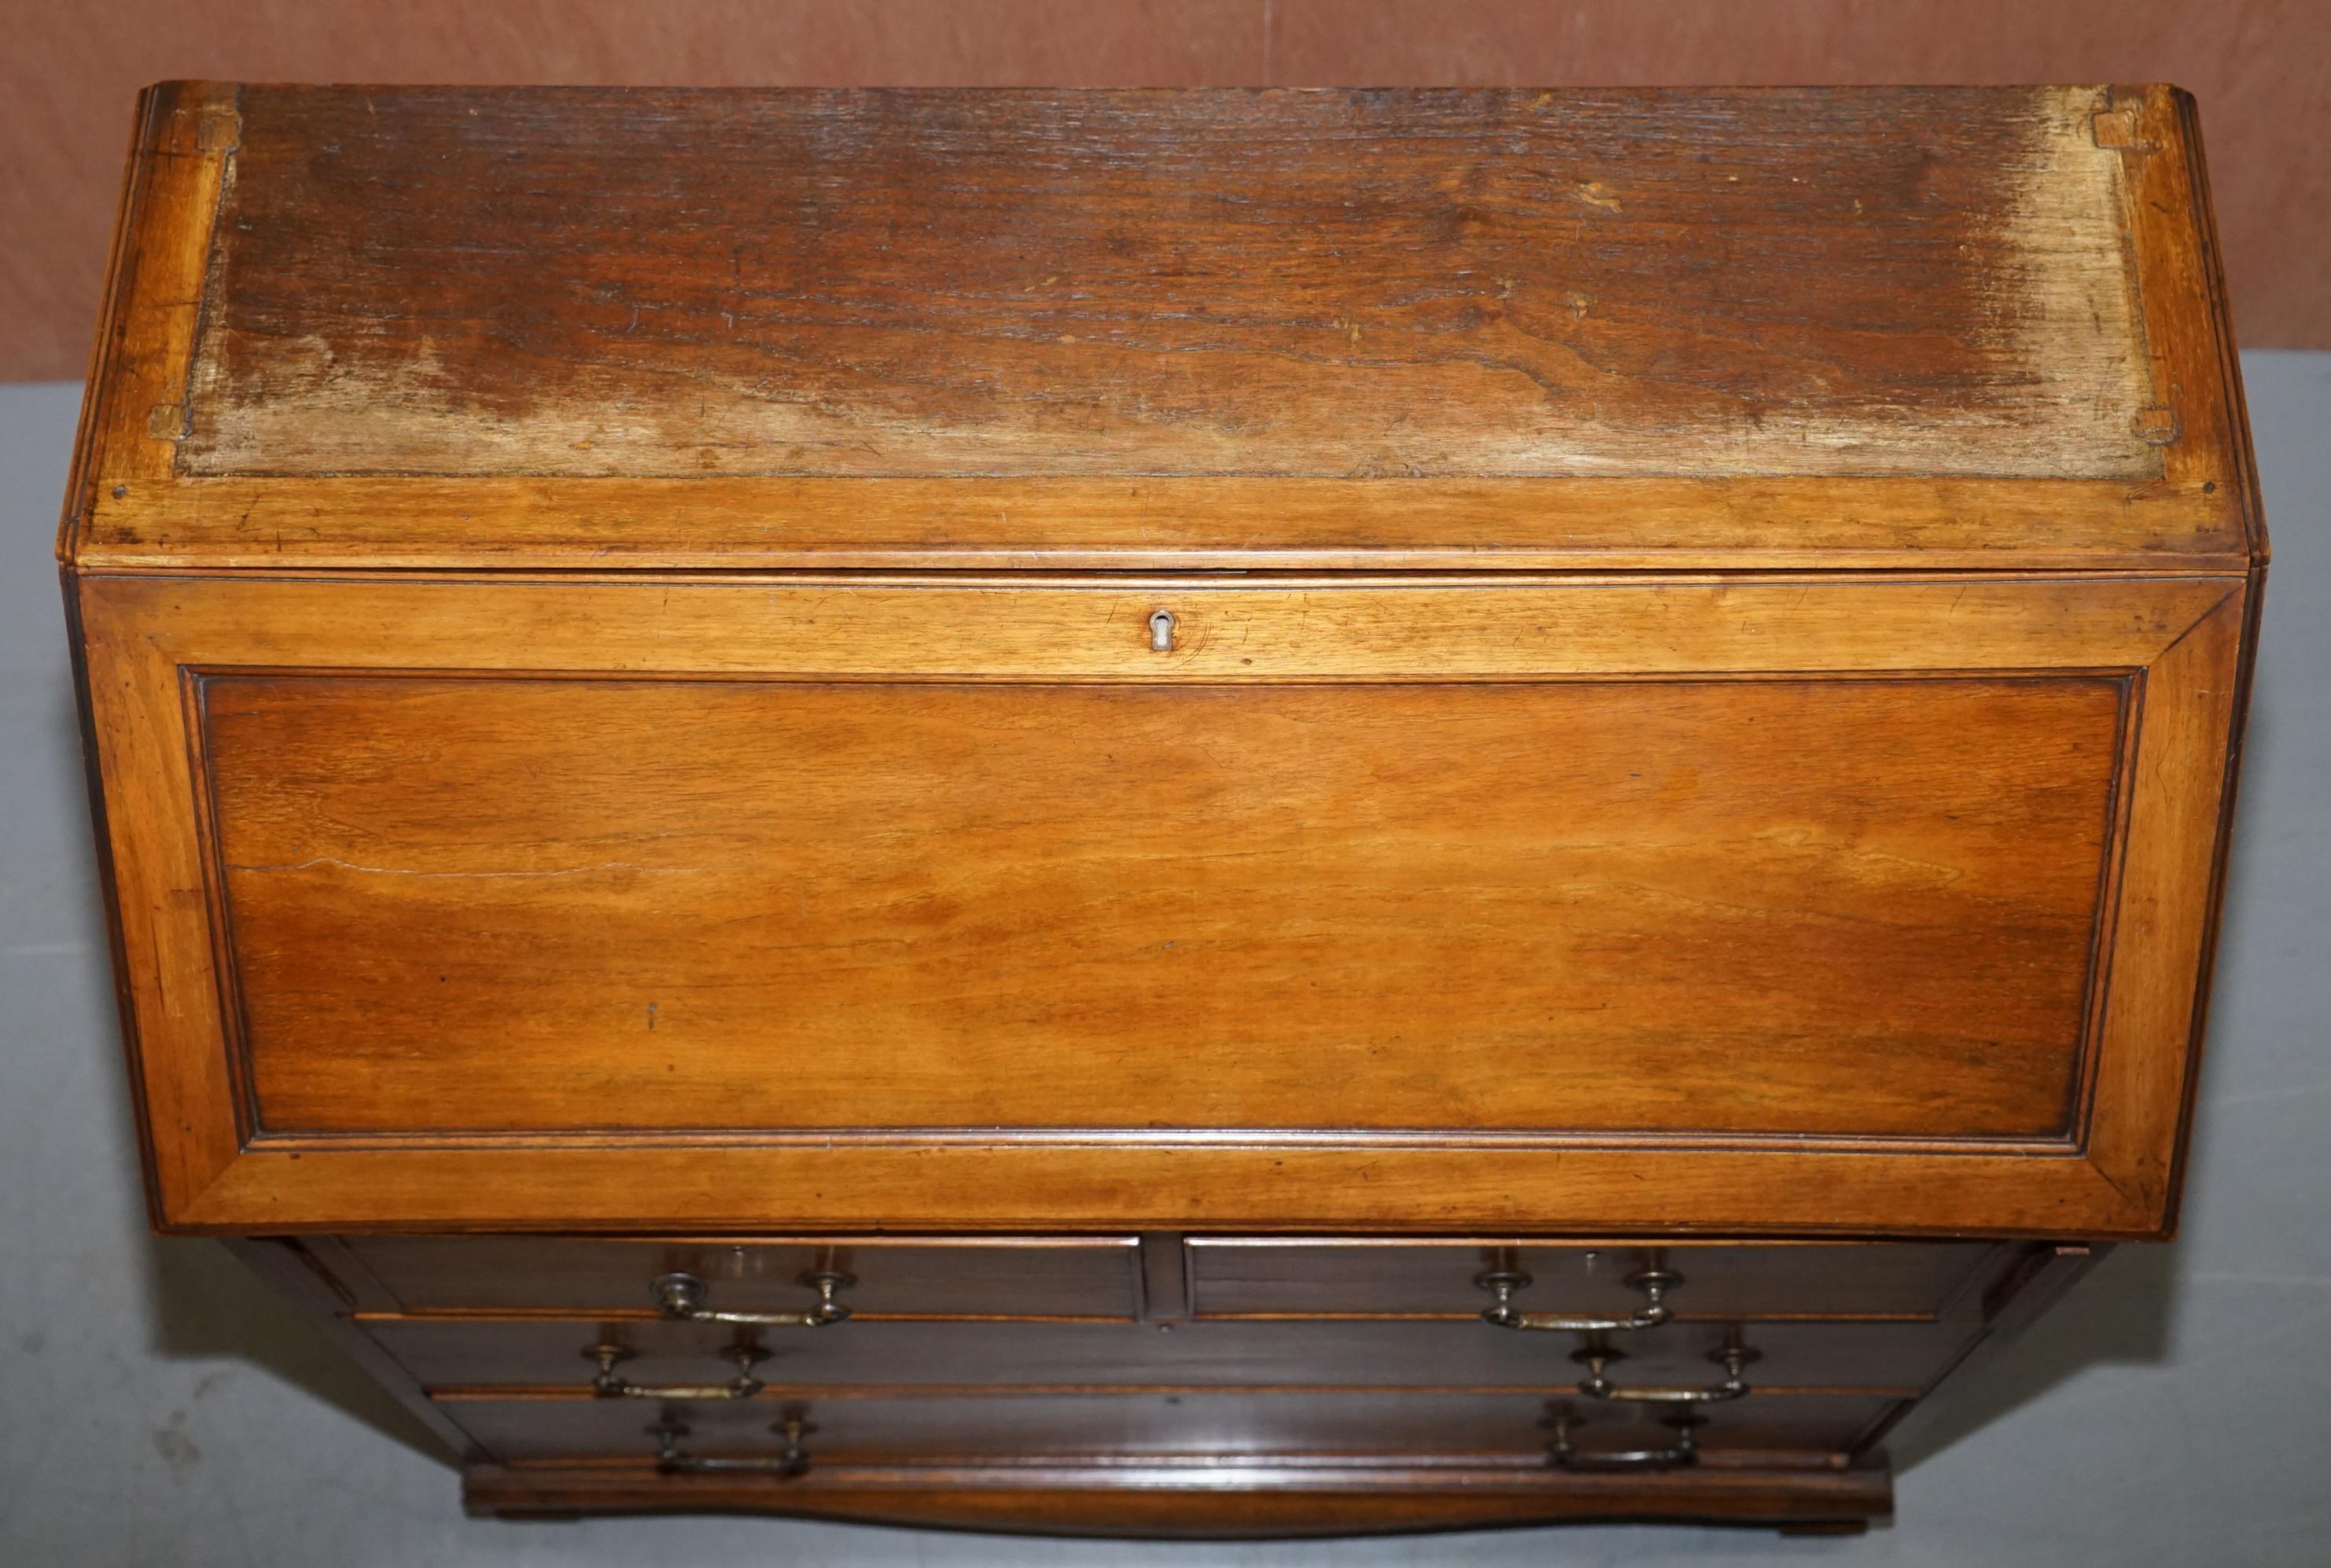 Late Victorian Lovely circa 1900 Solid Walnut Writing Bureau Chest of Drawers with Desk Top